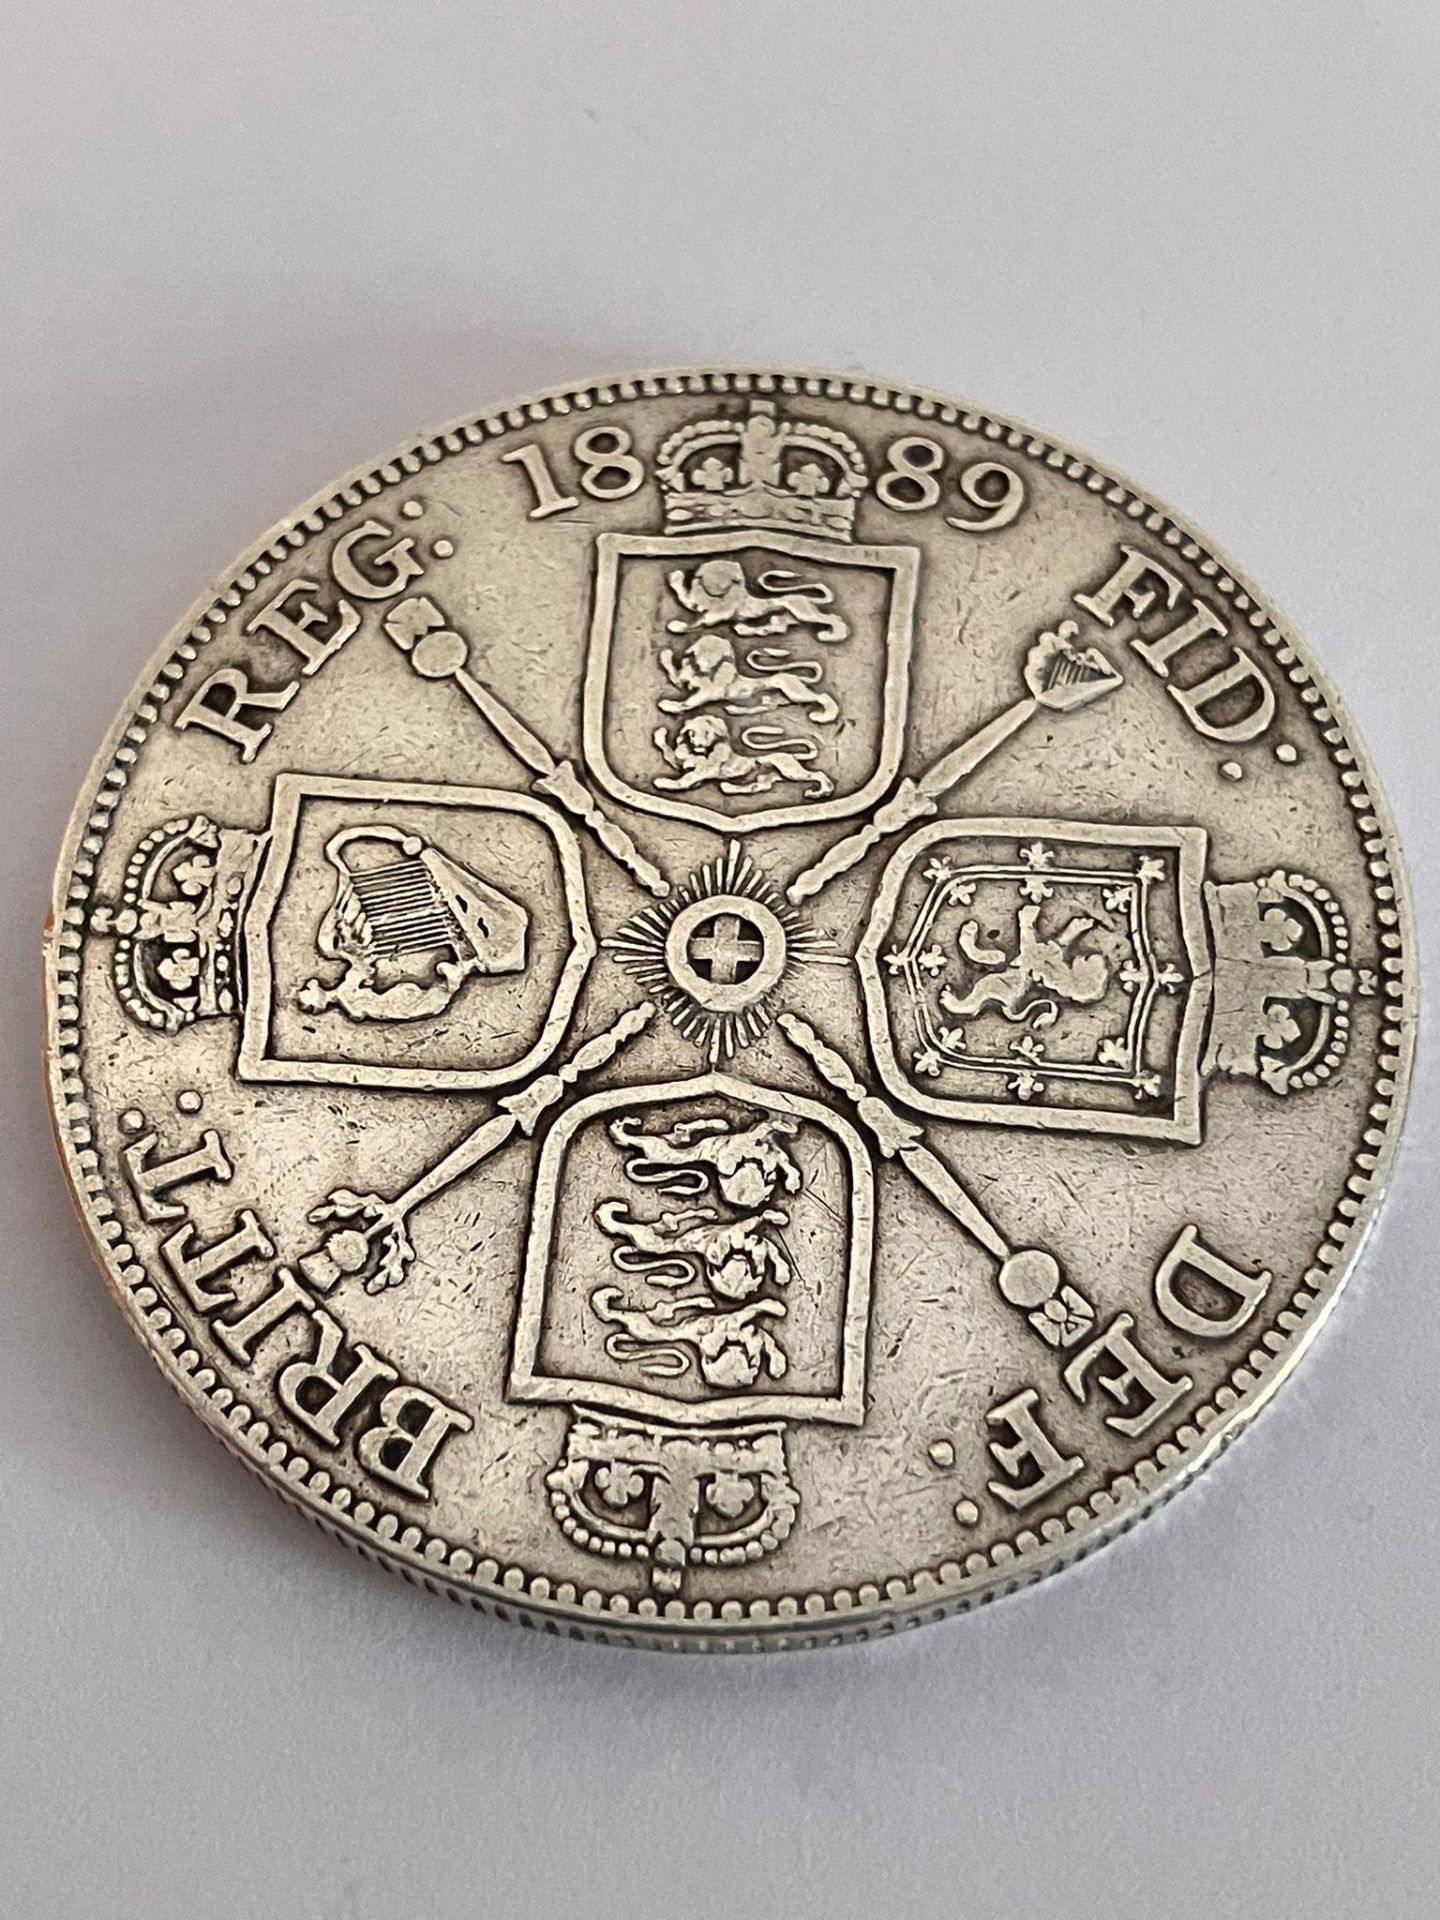 1889 SILVER DOUBLE FLORIN in very fine/extra fine condition. Having clear and bold definition to